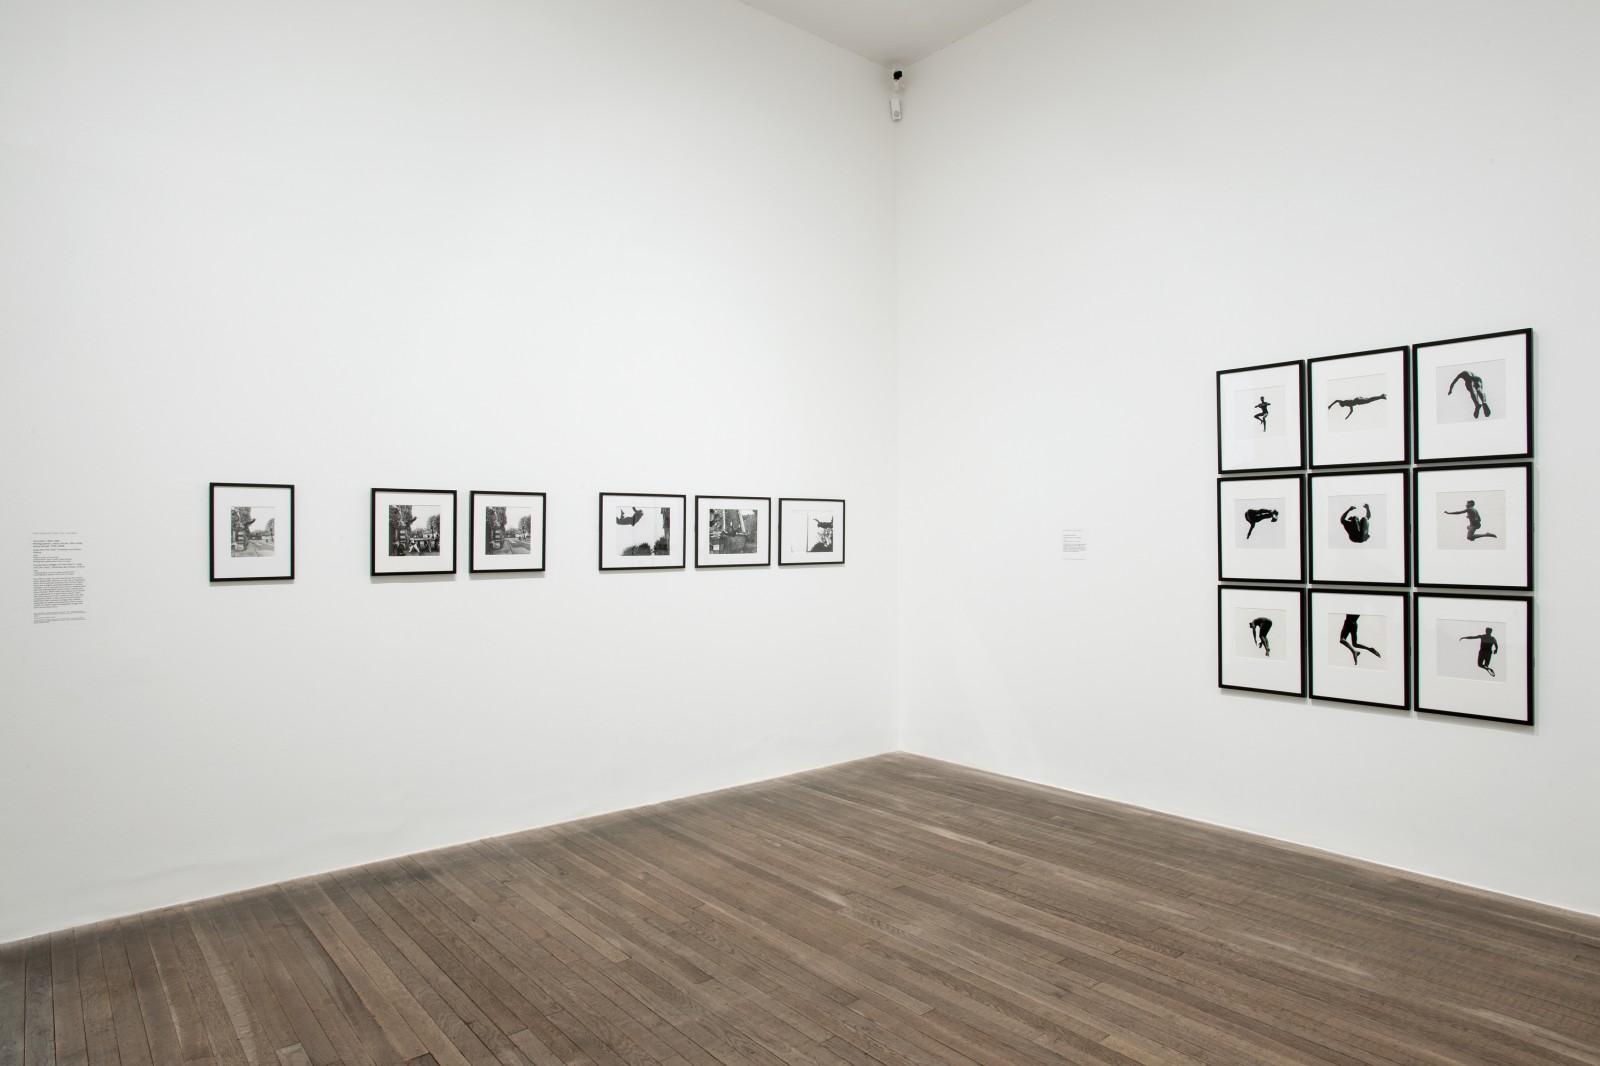 View of the exhibition "Performing for the Camera", Tate Modern, 2016